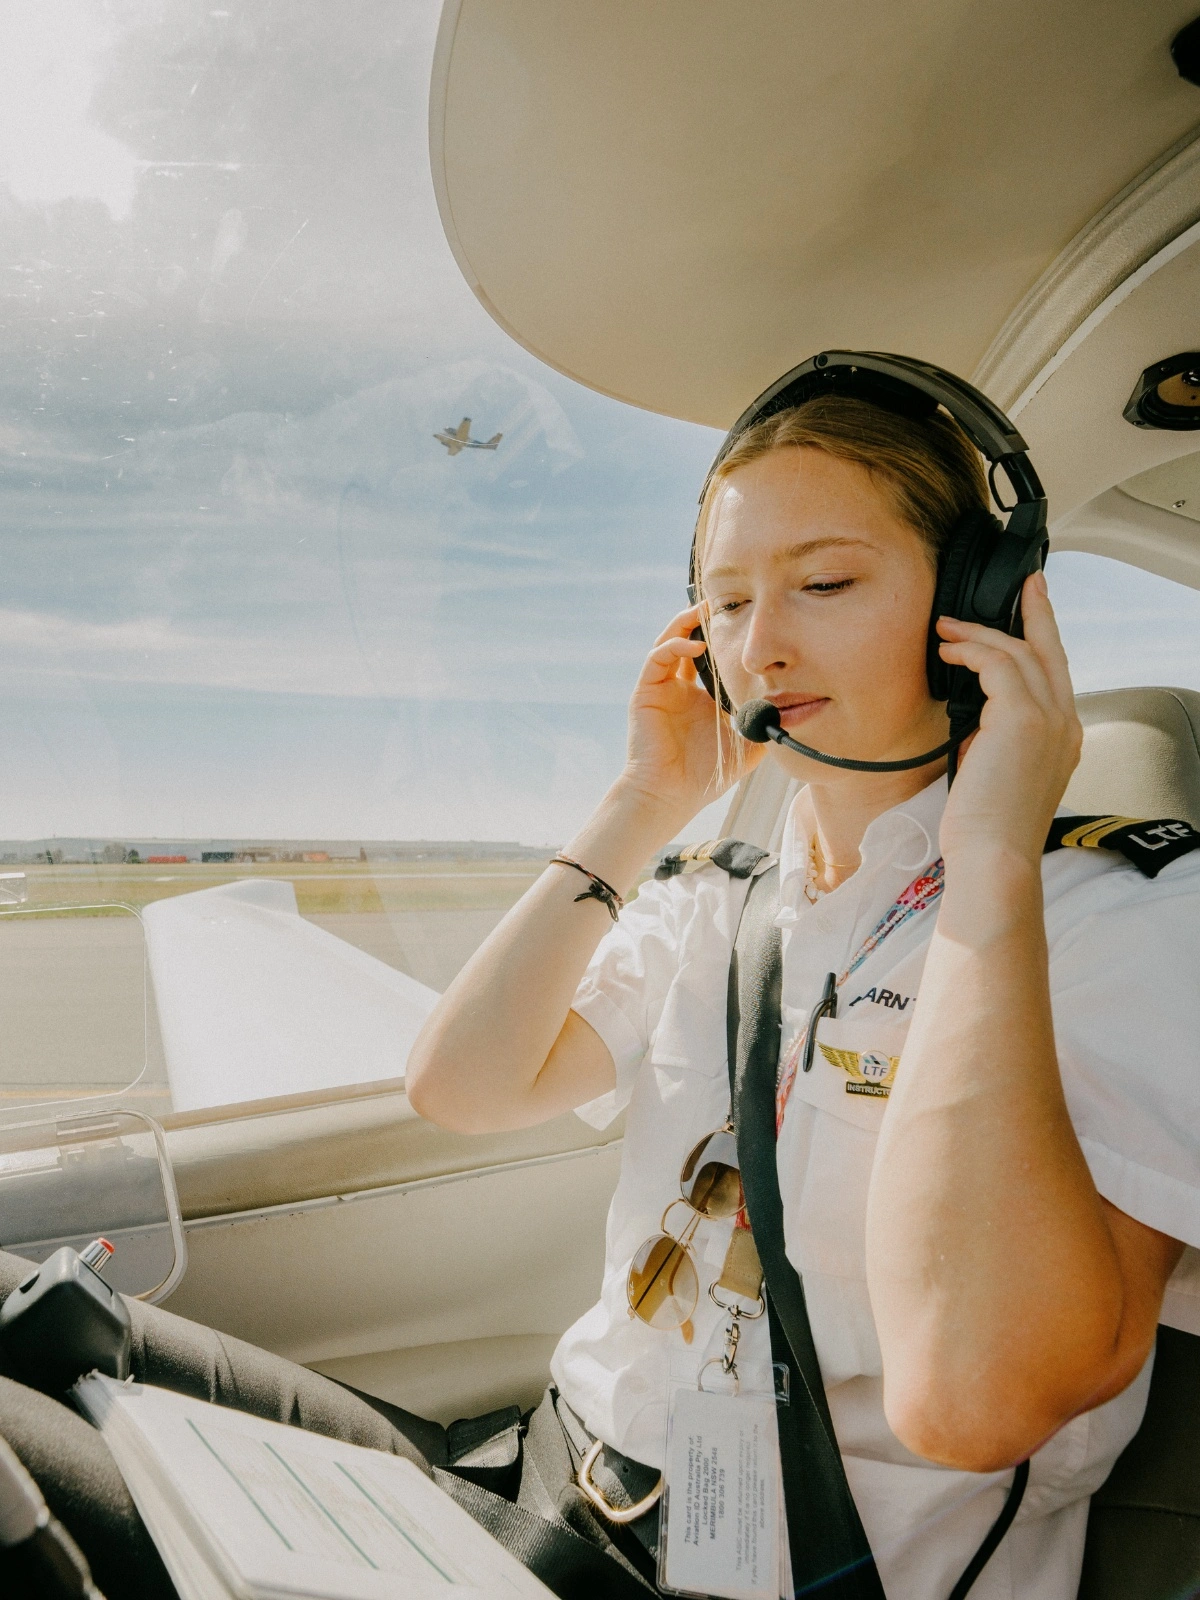 A-Guide-To-Professional-Aviation-Careers